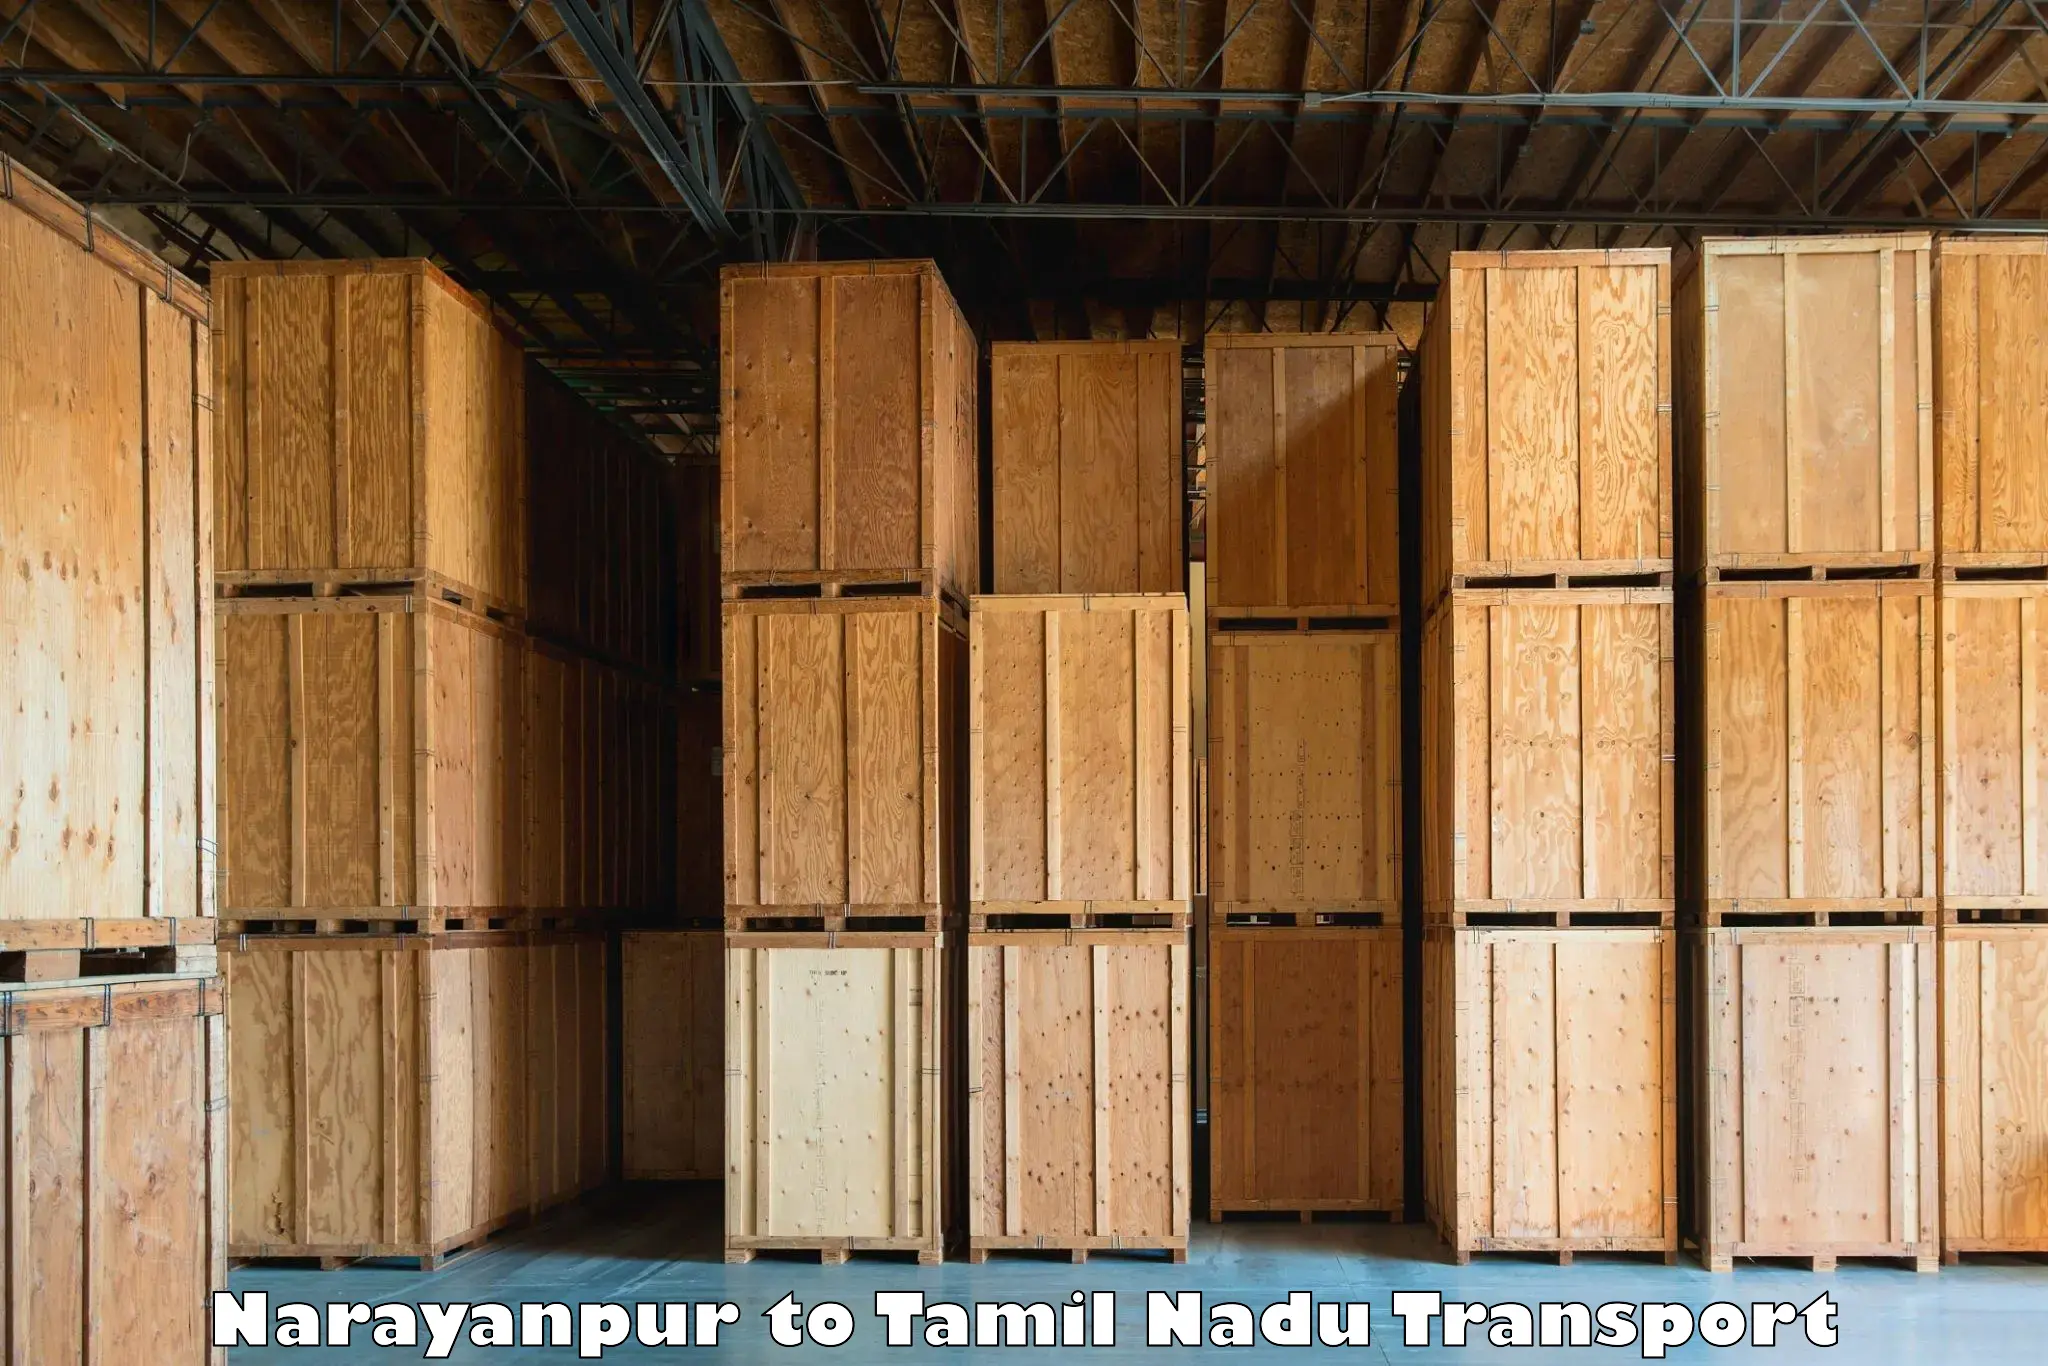 Daily transport service Narayanpur to Cuddalore